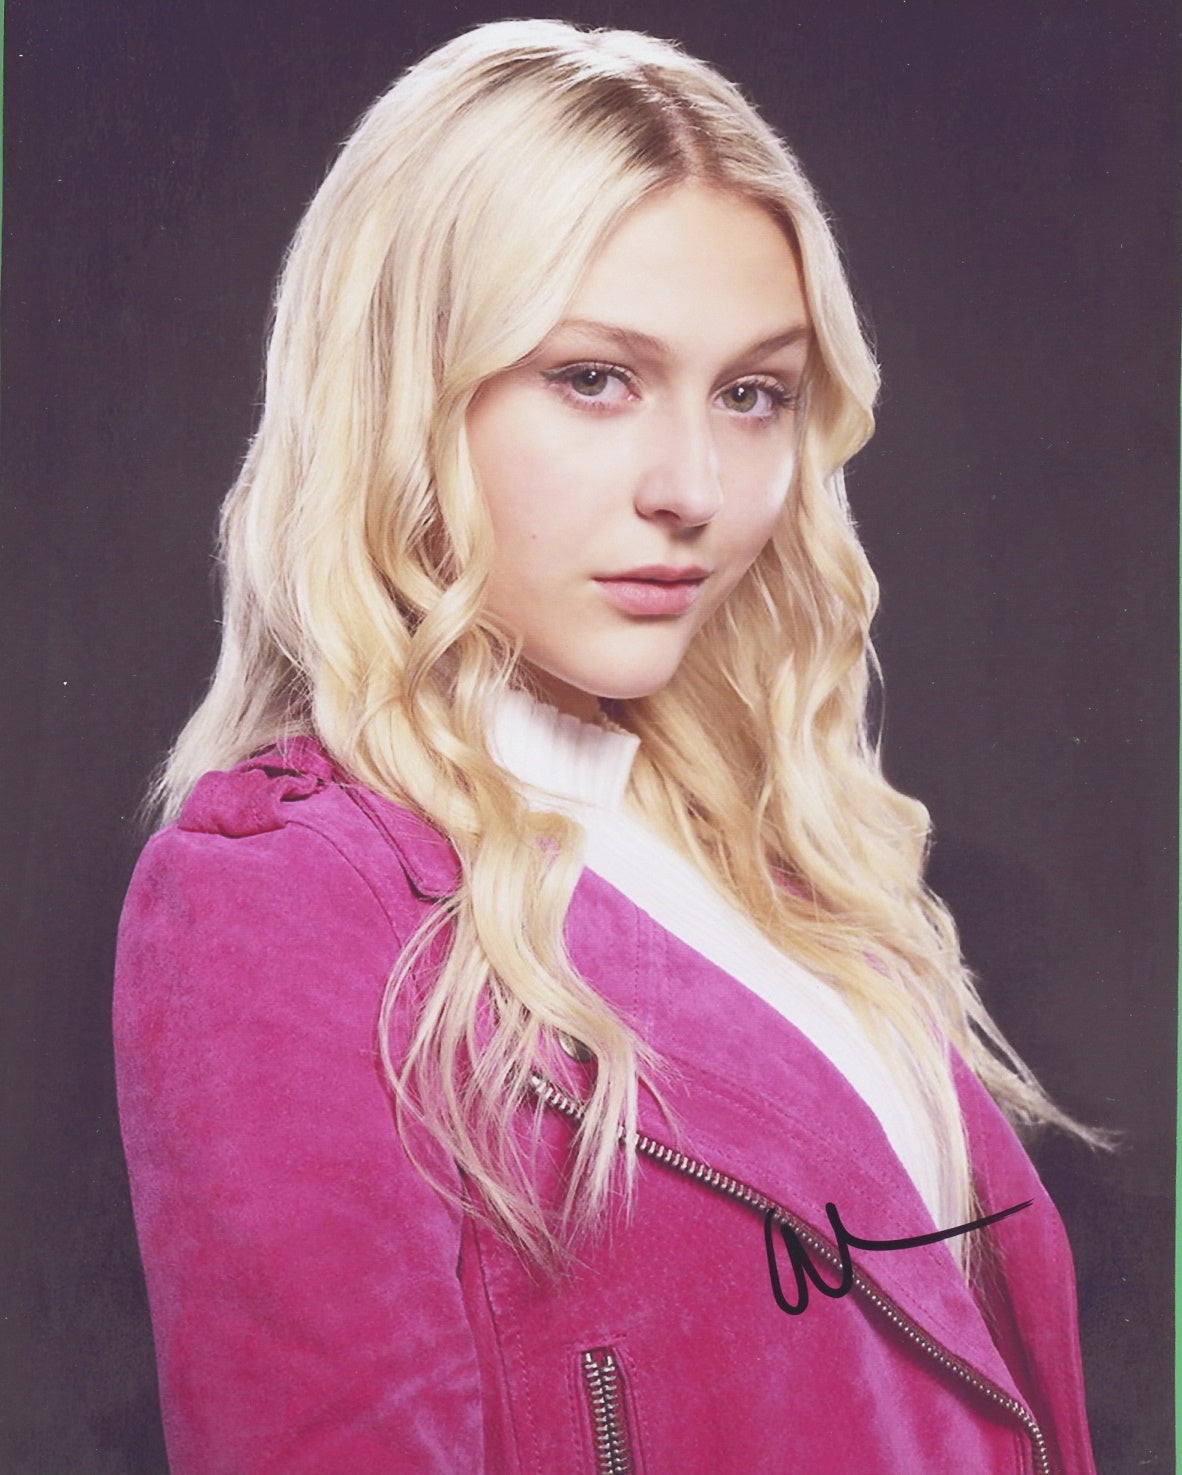 Alyvia Alyn Lind Signed 8x10 Photo